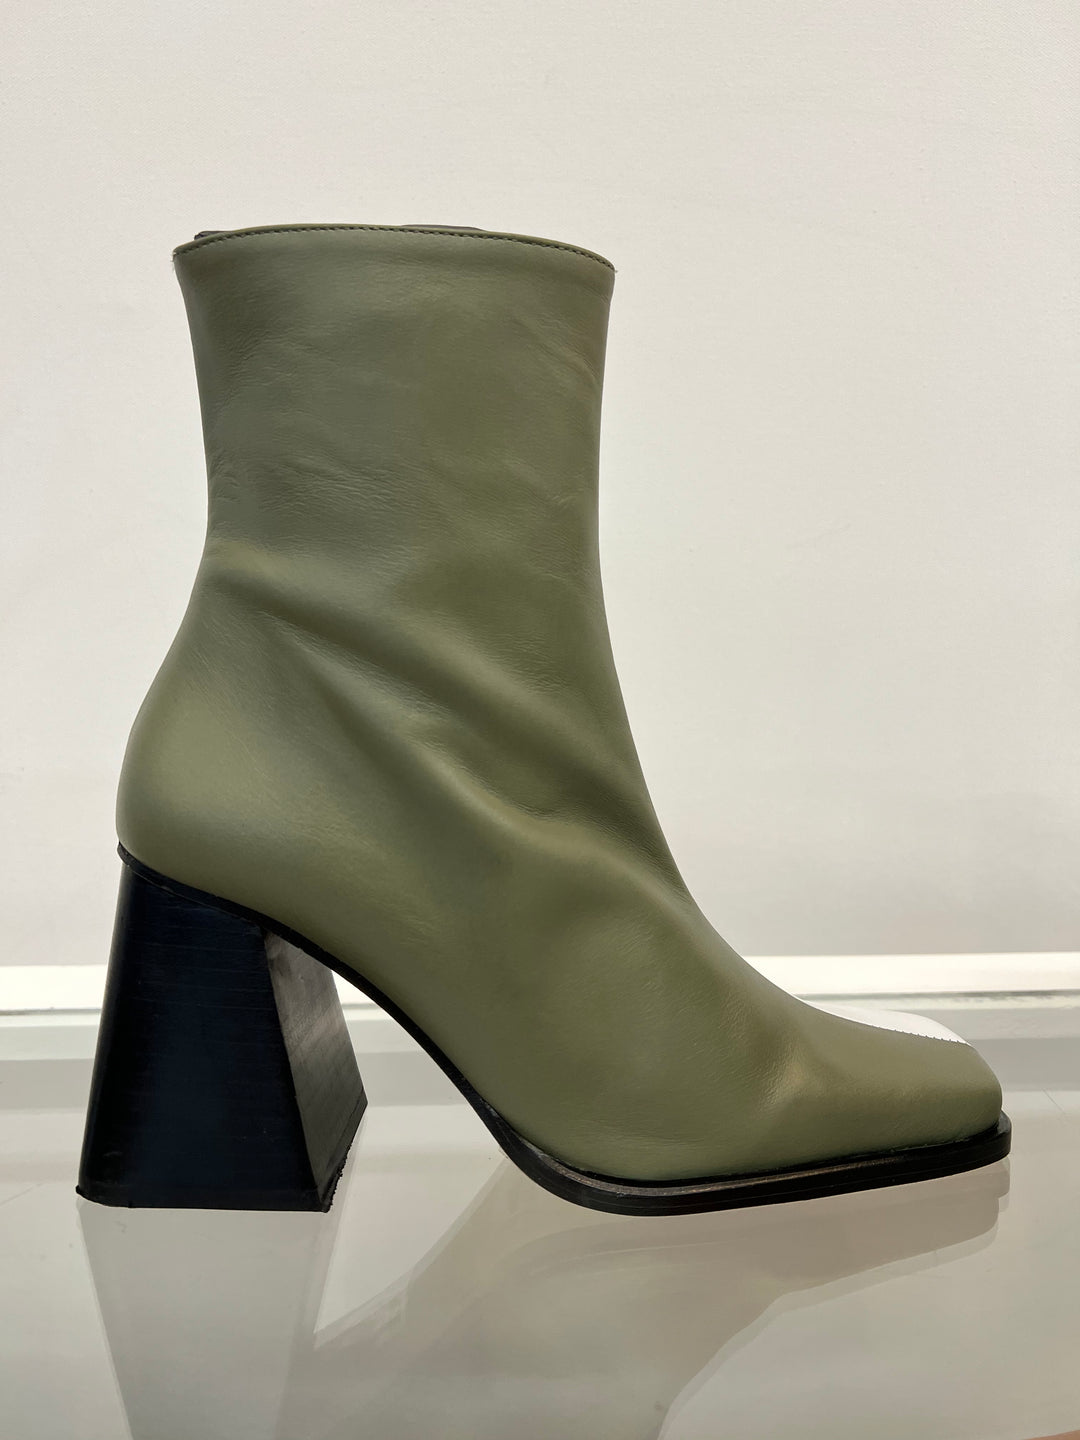 Alohas - South Bi-color Ankle Boots in Dusty Olive & Bright White